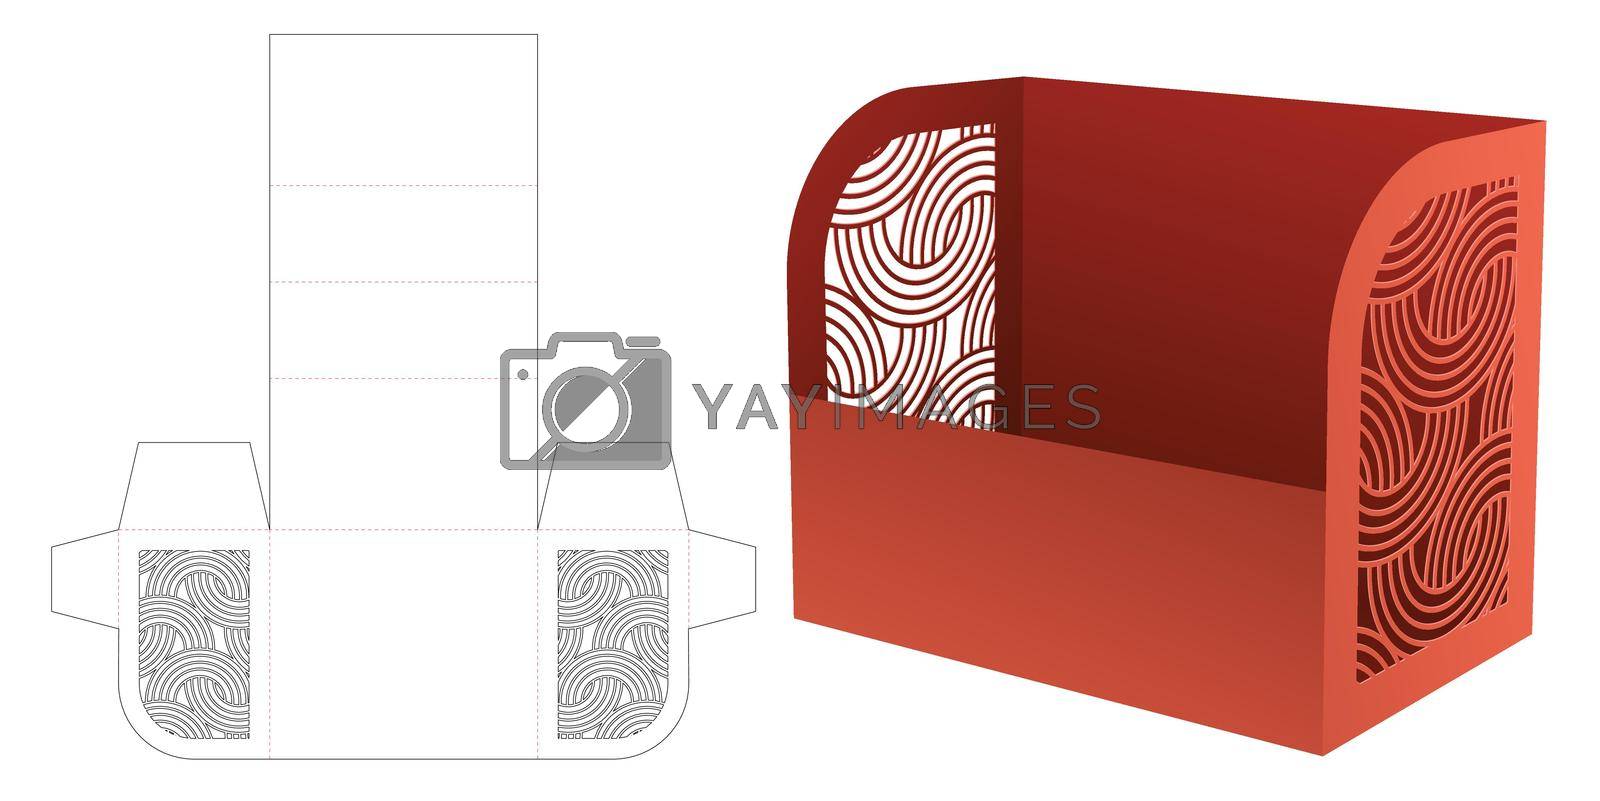 Royalty free image of Cardboard stationery box with stenciled curved pattern die cut template and 3D mockup by valueinvestor